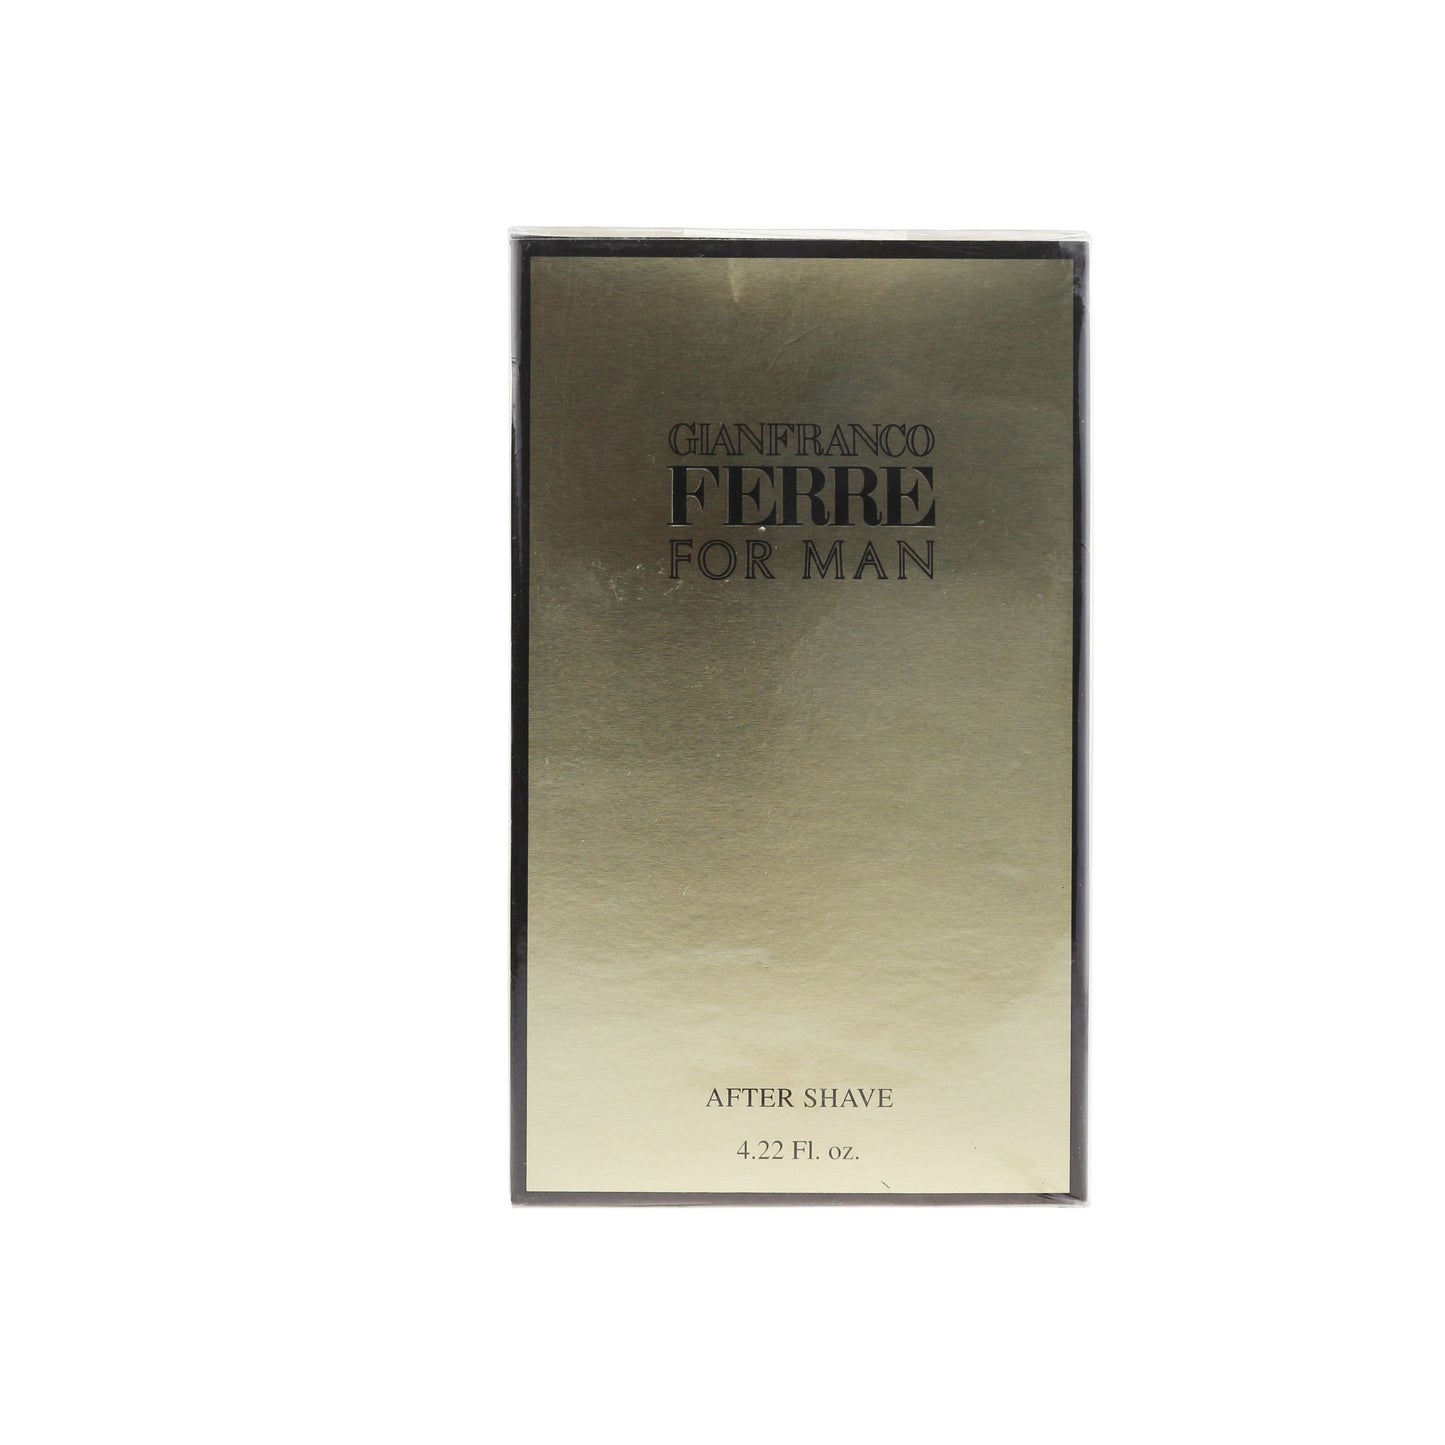 Giafranco 'Ferre Homme' After Shave 4.2oz/125ml New In Box